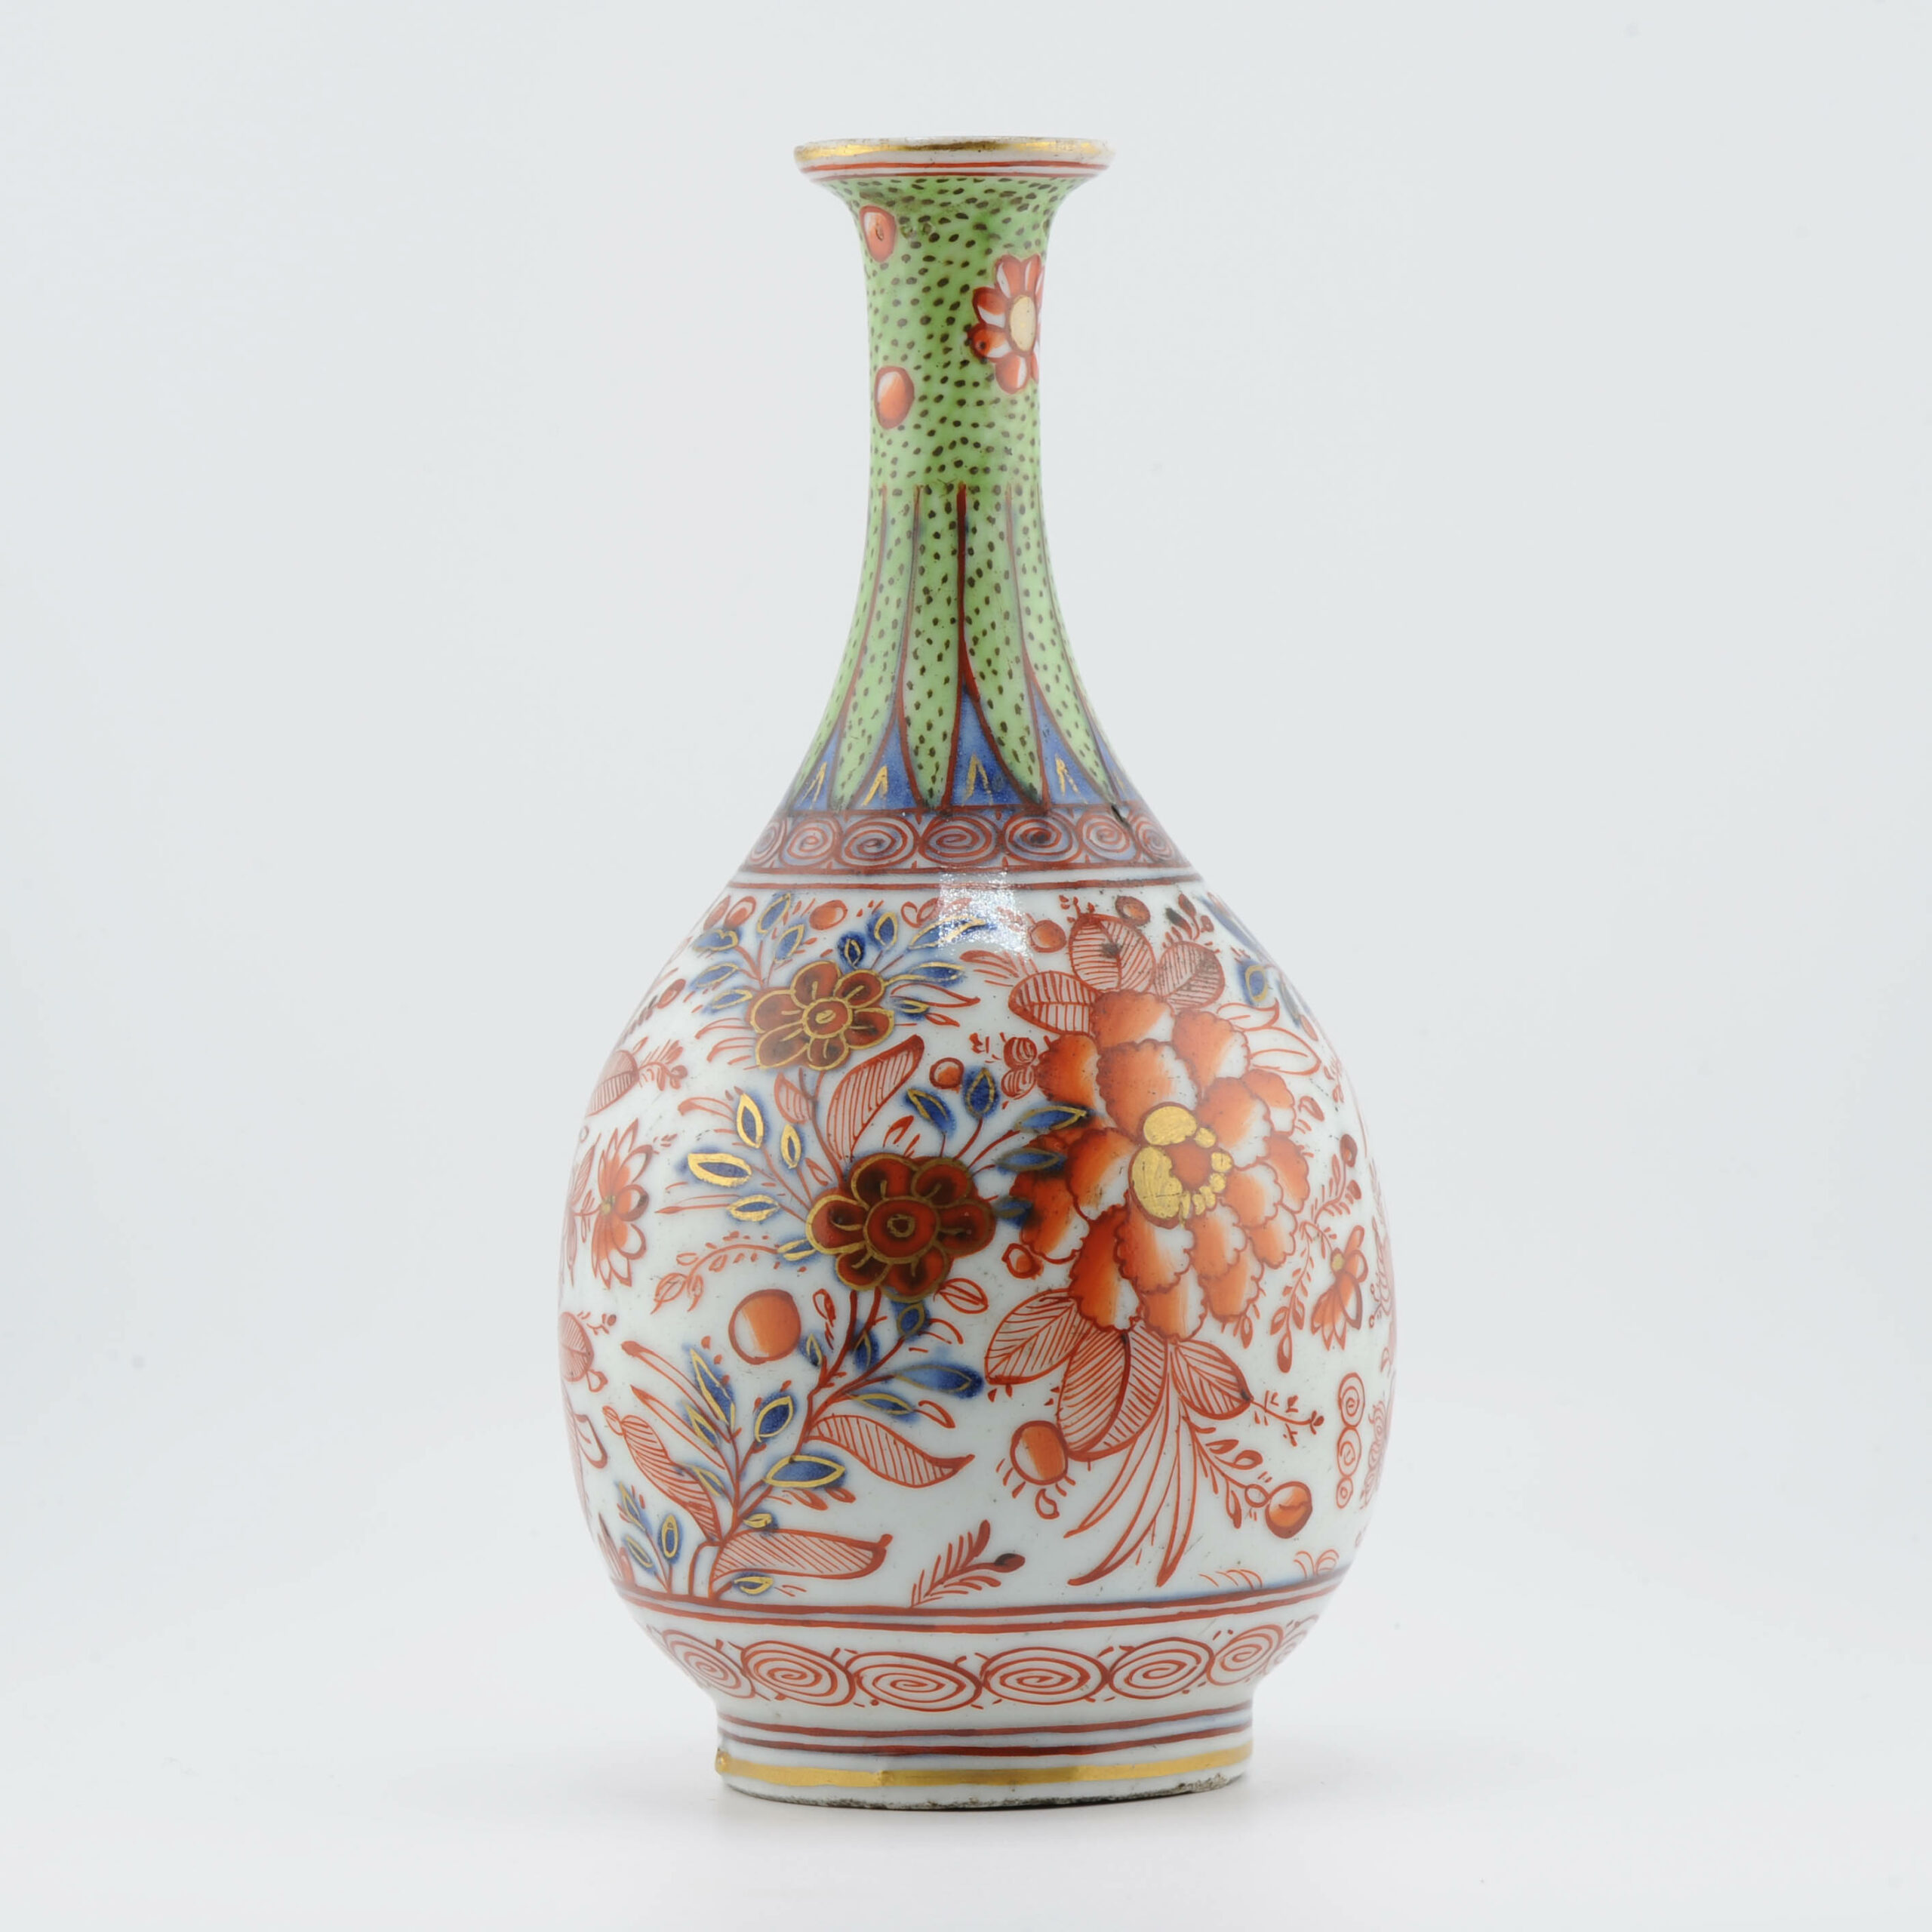 1346 Antique Chinese 1700-1720 Vase. Redecorated in the UK.